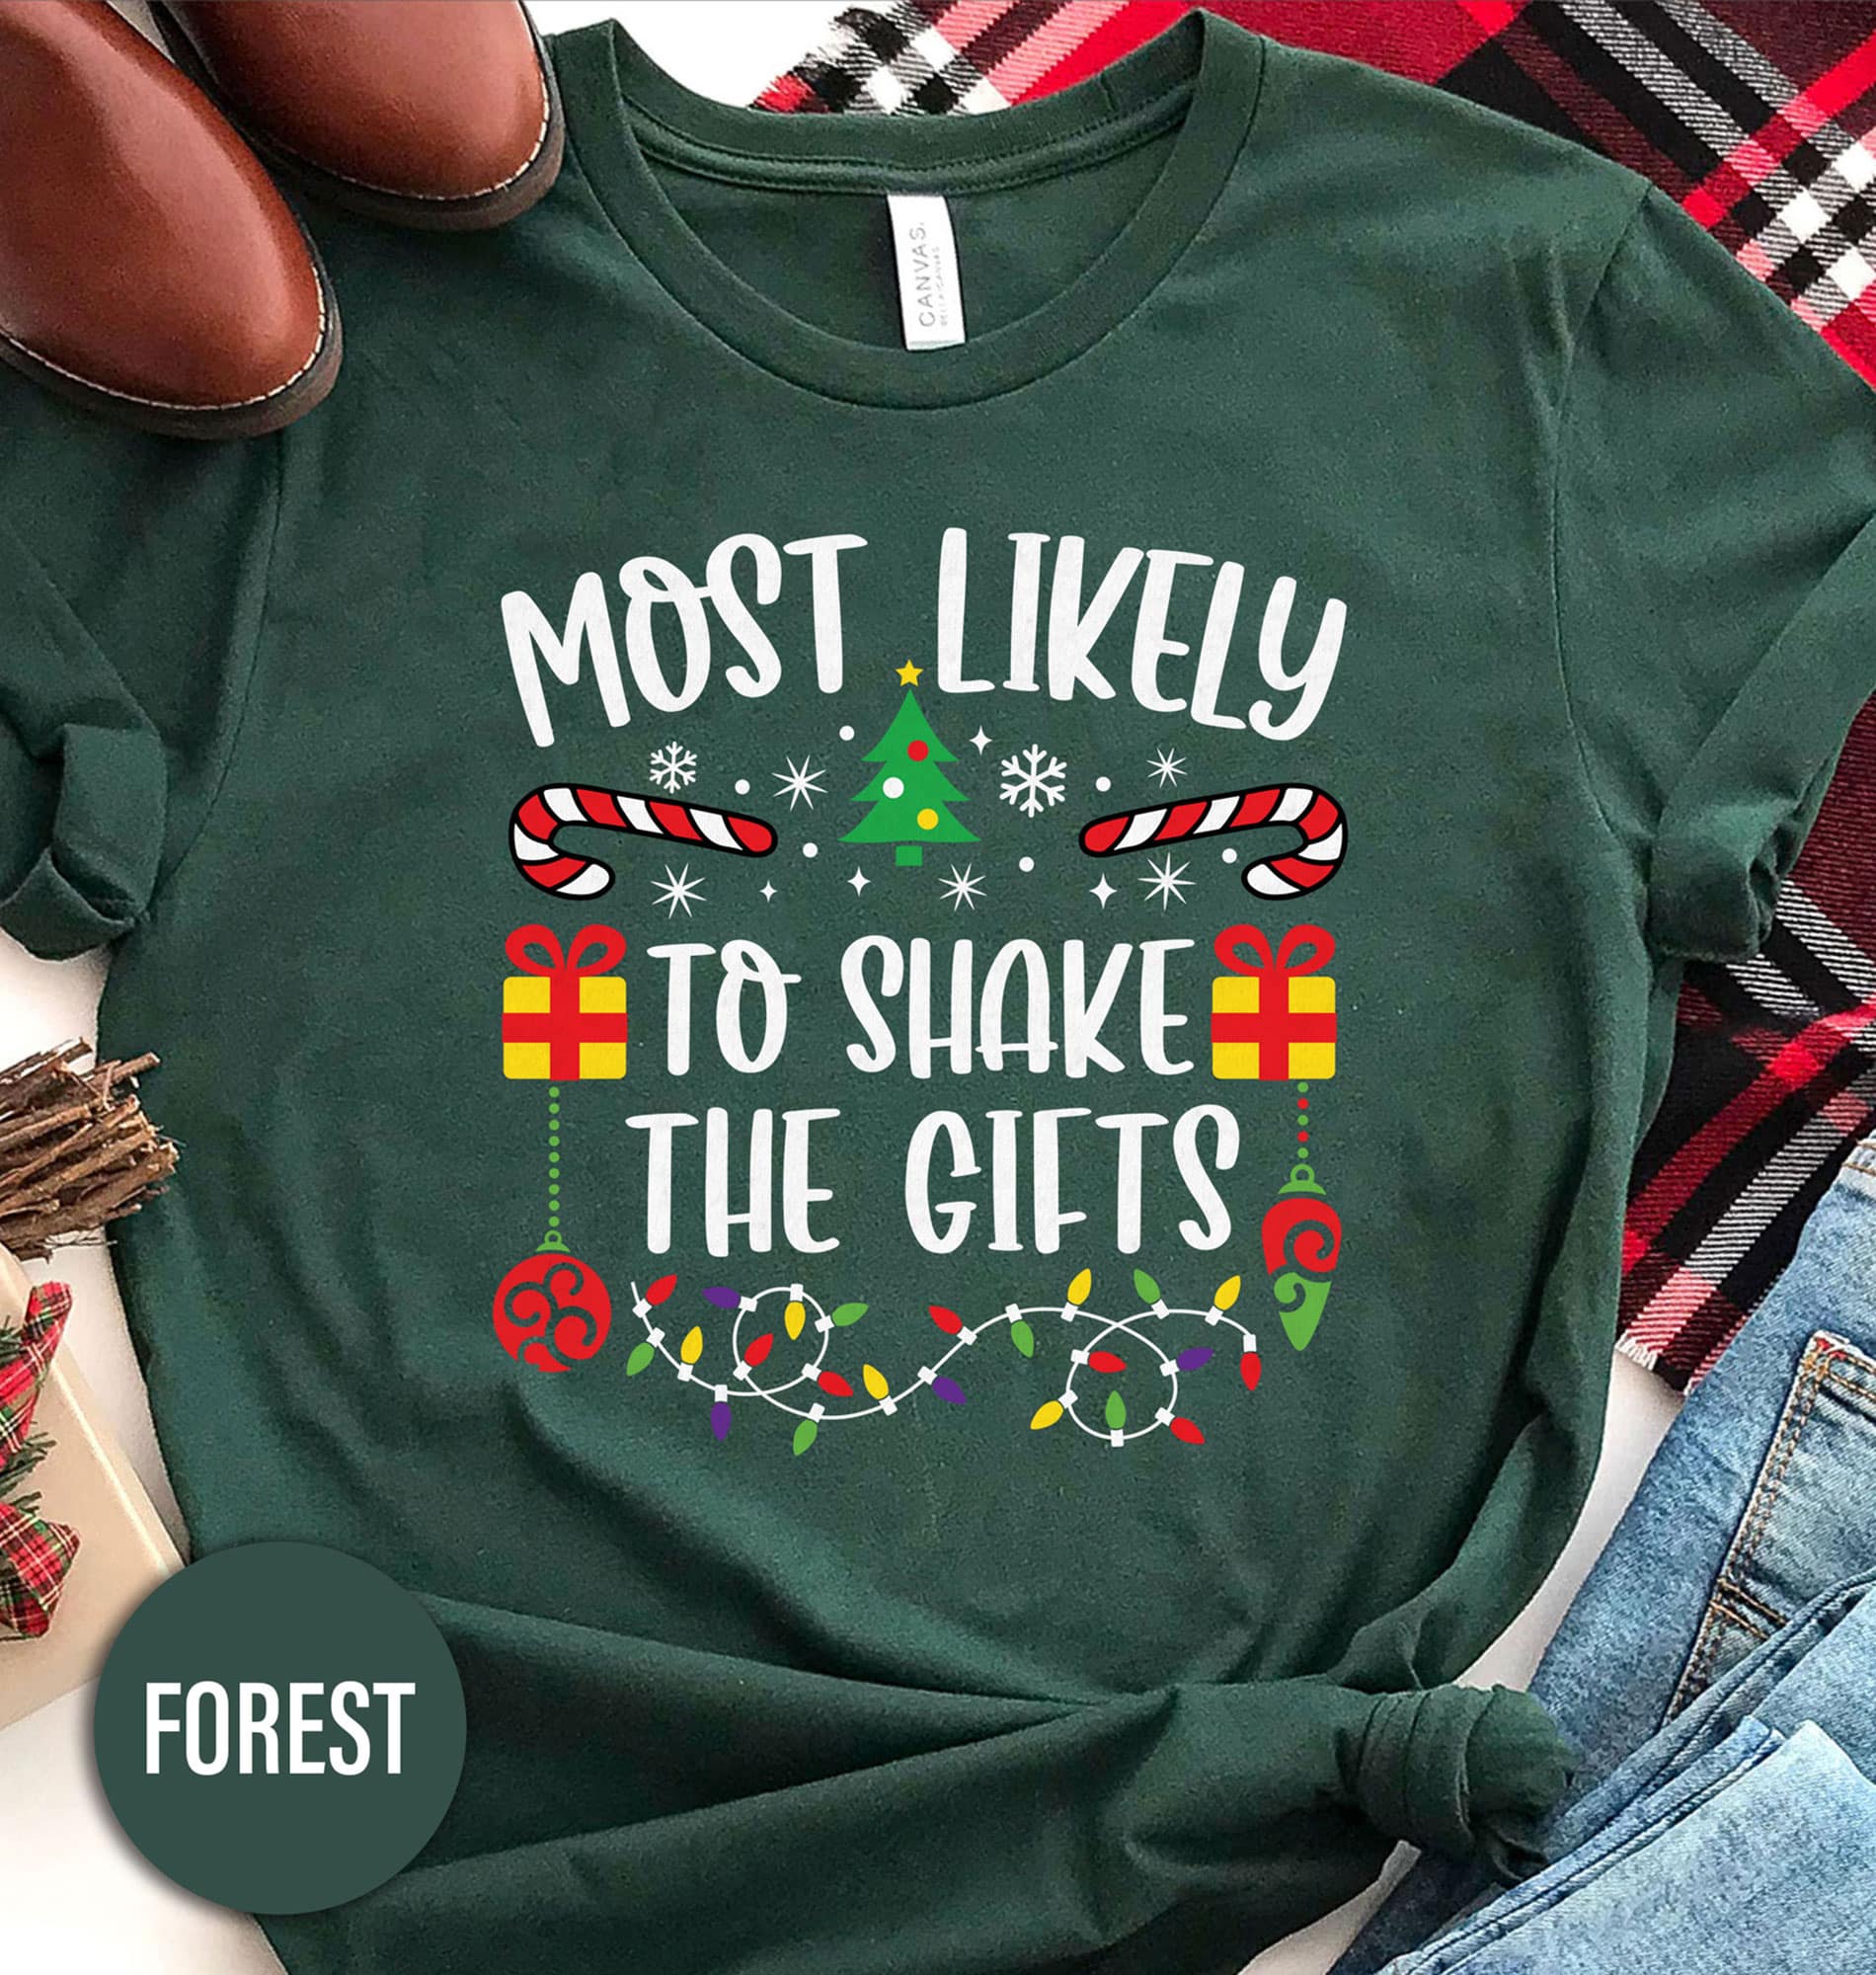 5 Sarcastic T-Shirts That Will Make Great Funny Holiday Gifts